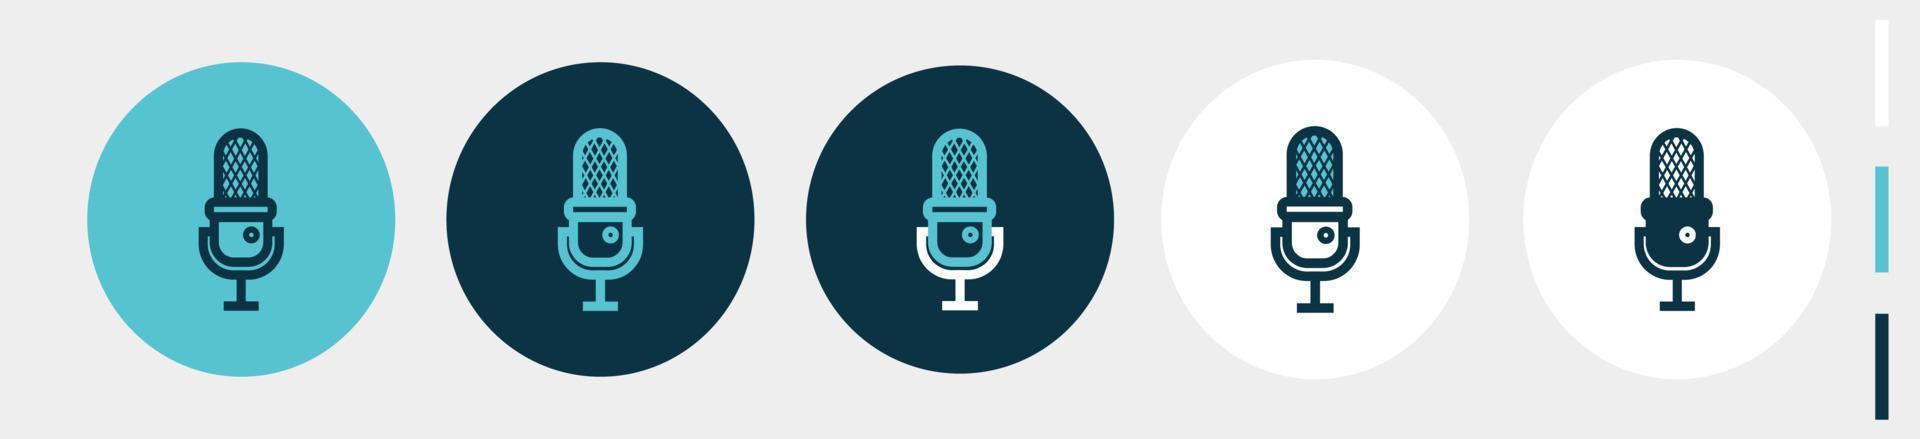 microphone vintage set icons. classic microphone isolated on white vector